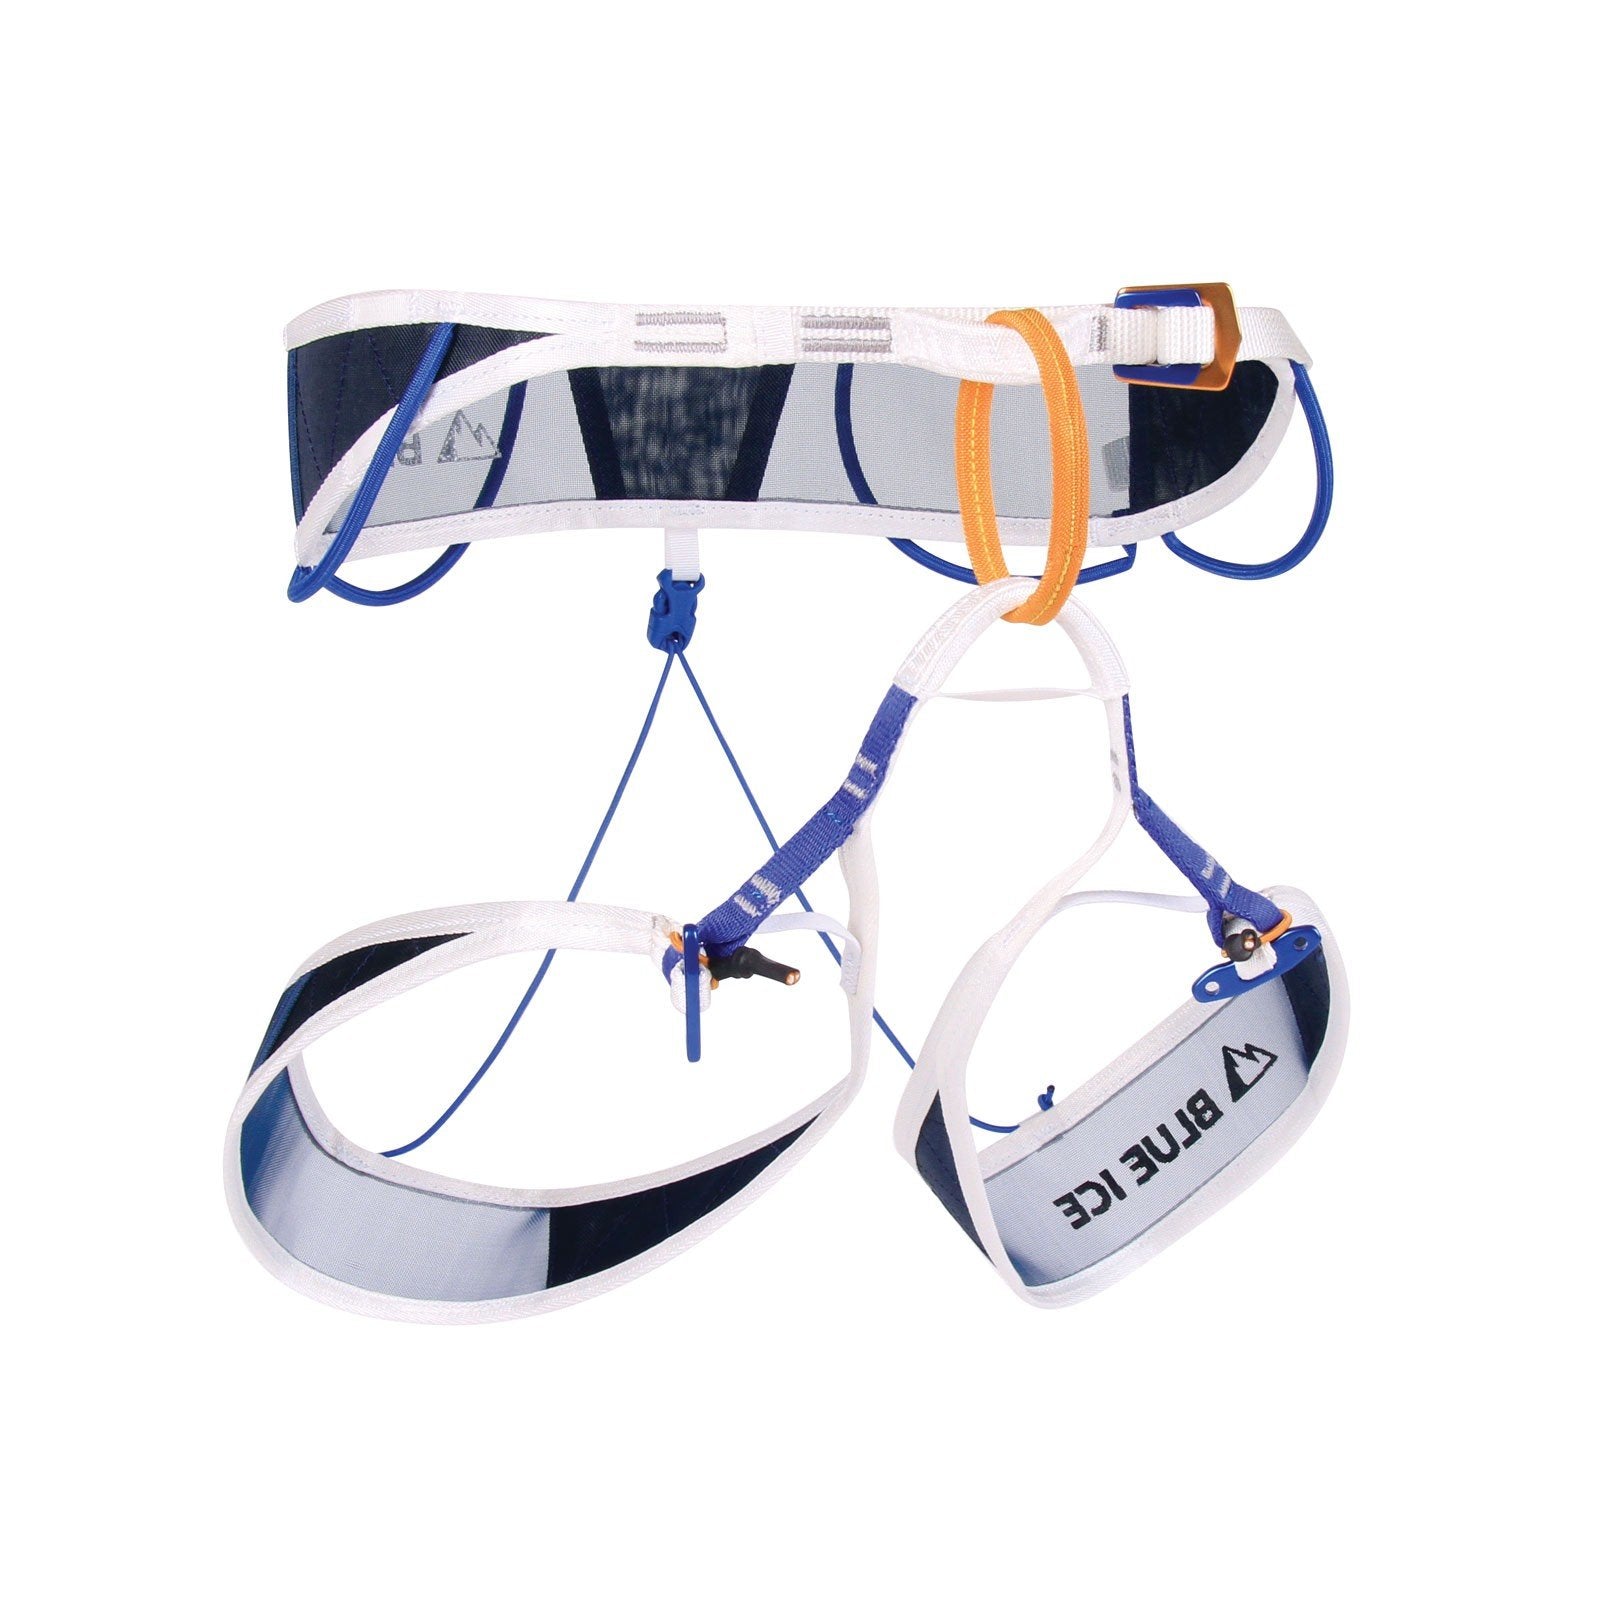 Blue Ice Choucas Pro Harness, front/side view in Blue, Orange and White colours